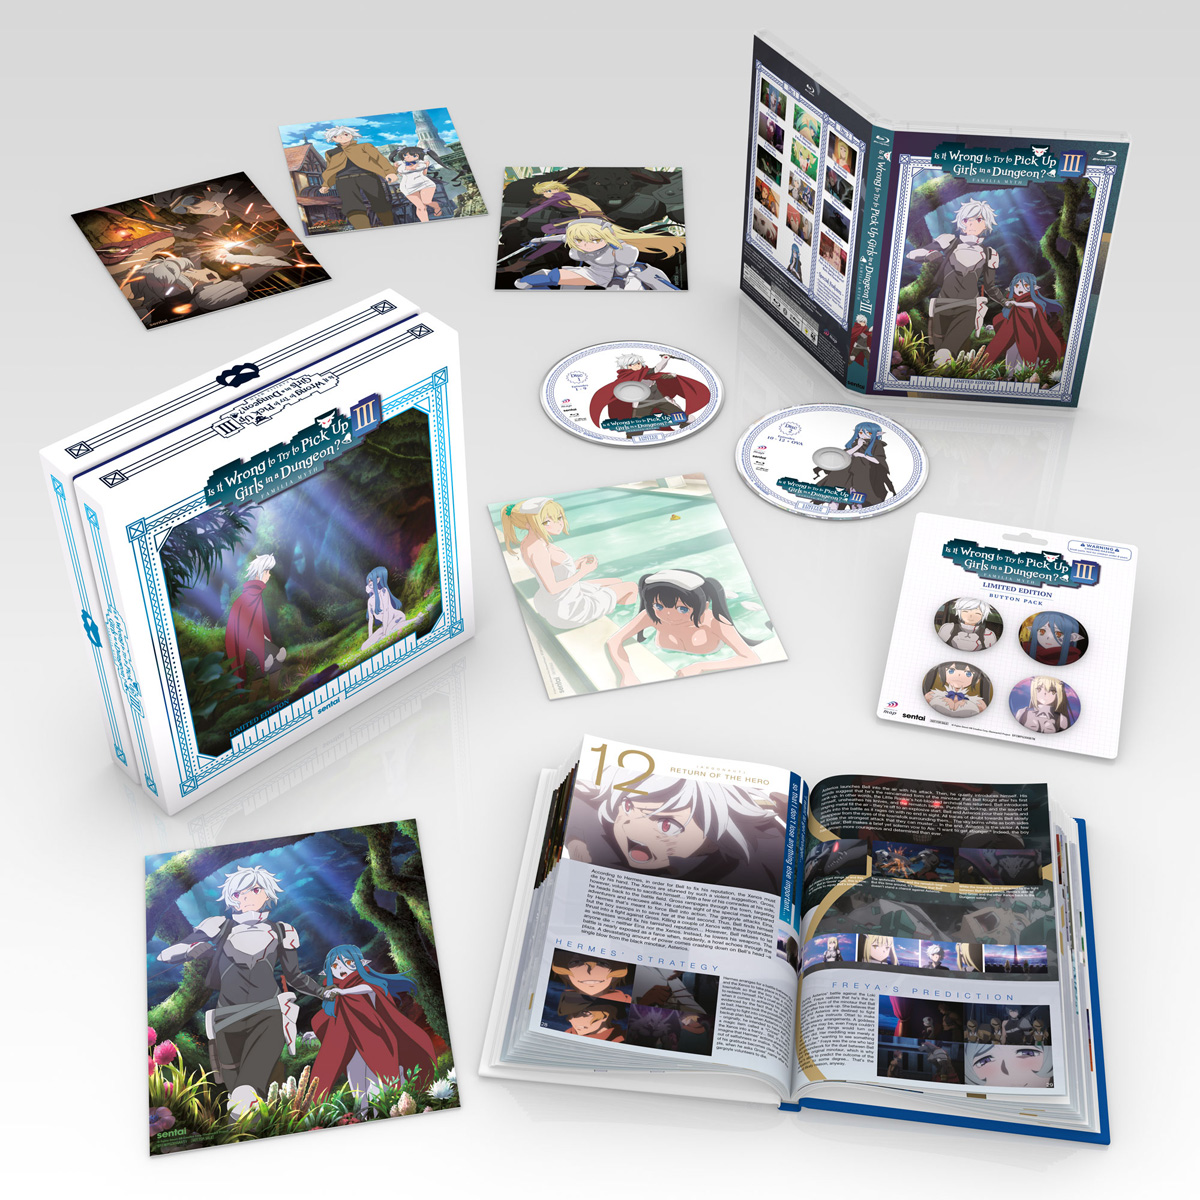 Is It Wrong to Try to Pick Up Girls in a Dungeon?! Season 4 Part 1 Blu-ray